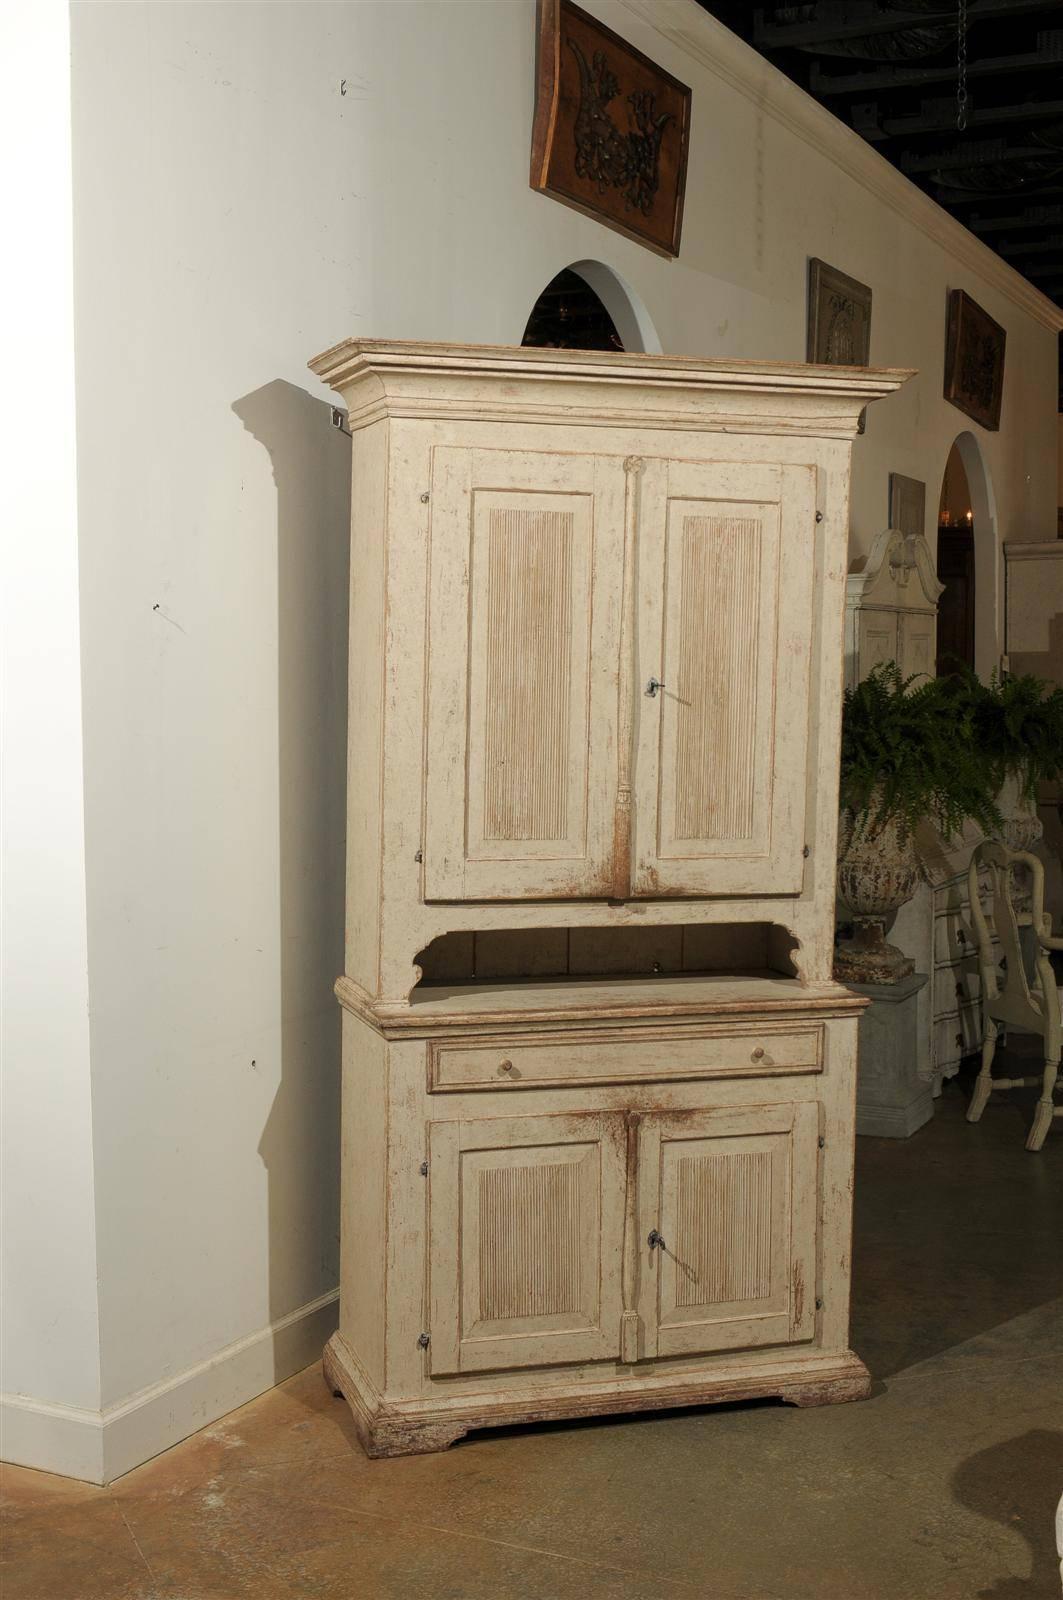 A Swedish Gustavian early 19th century painted wood two-part cabinet from the county of Jämtland. Born in the second decade of the 19th century in Jämtland, a county situated in the middle of Sweden, this Swedish tall cabinet features a large molded